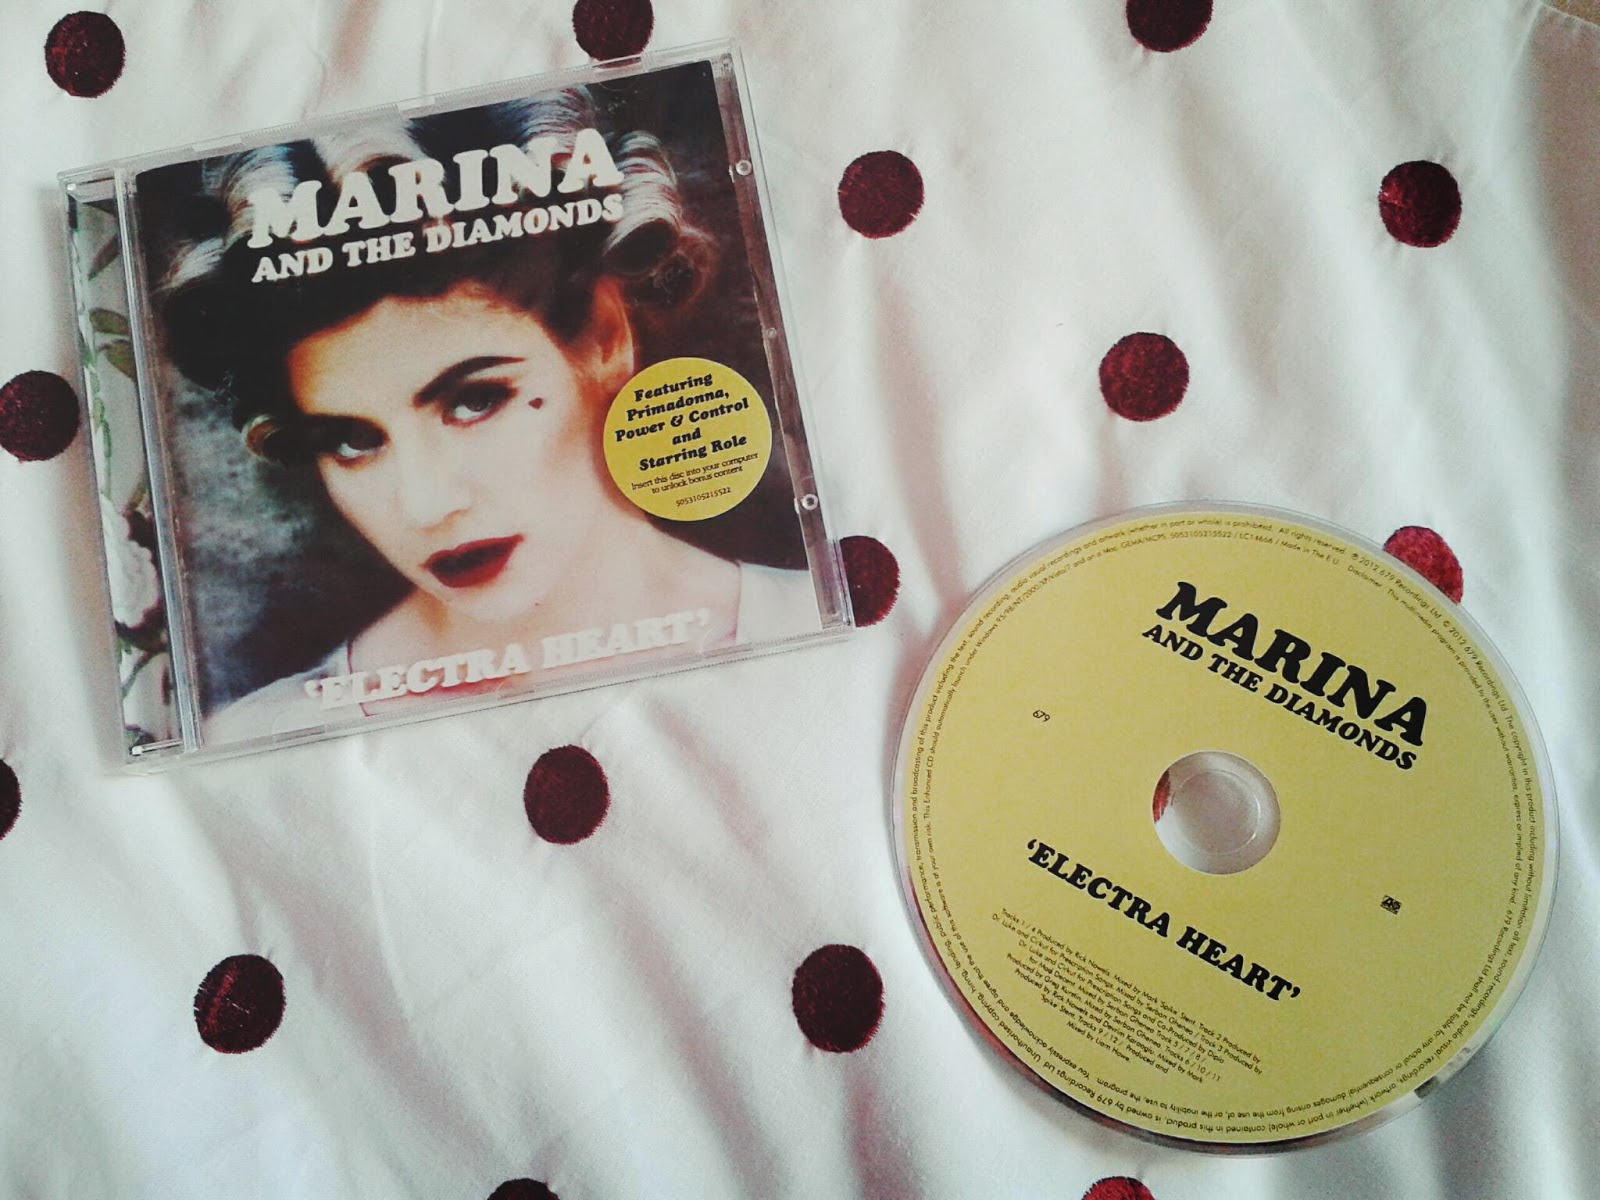 Album of the Month. Electra Heart by Marina and the Diamonds. uk beauty + lifestyle